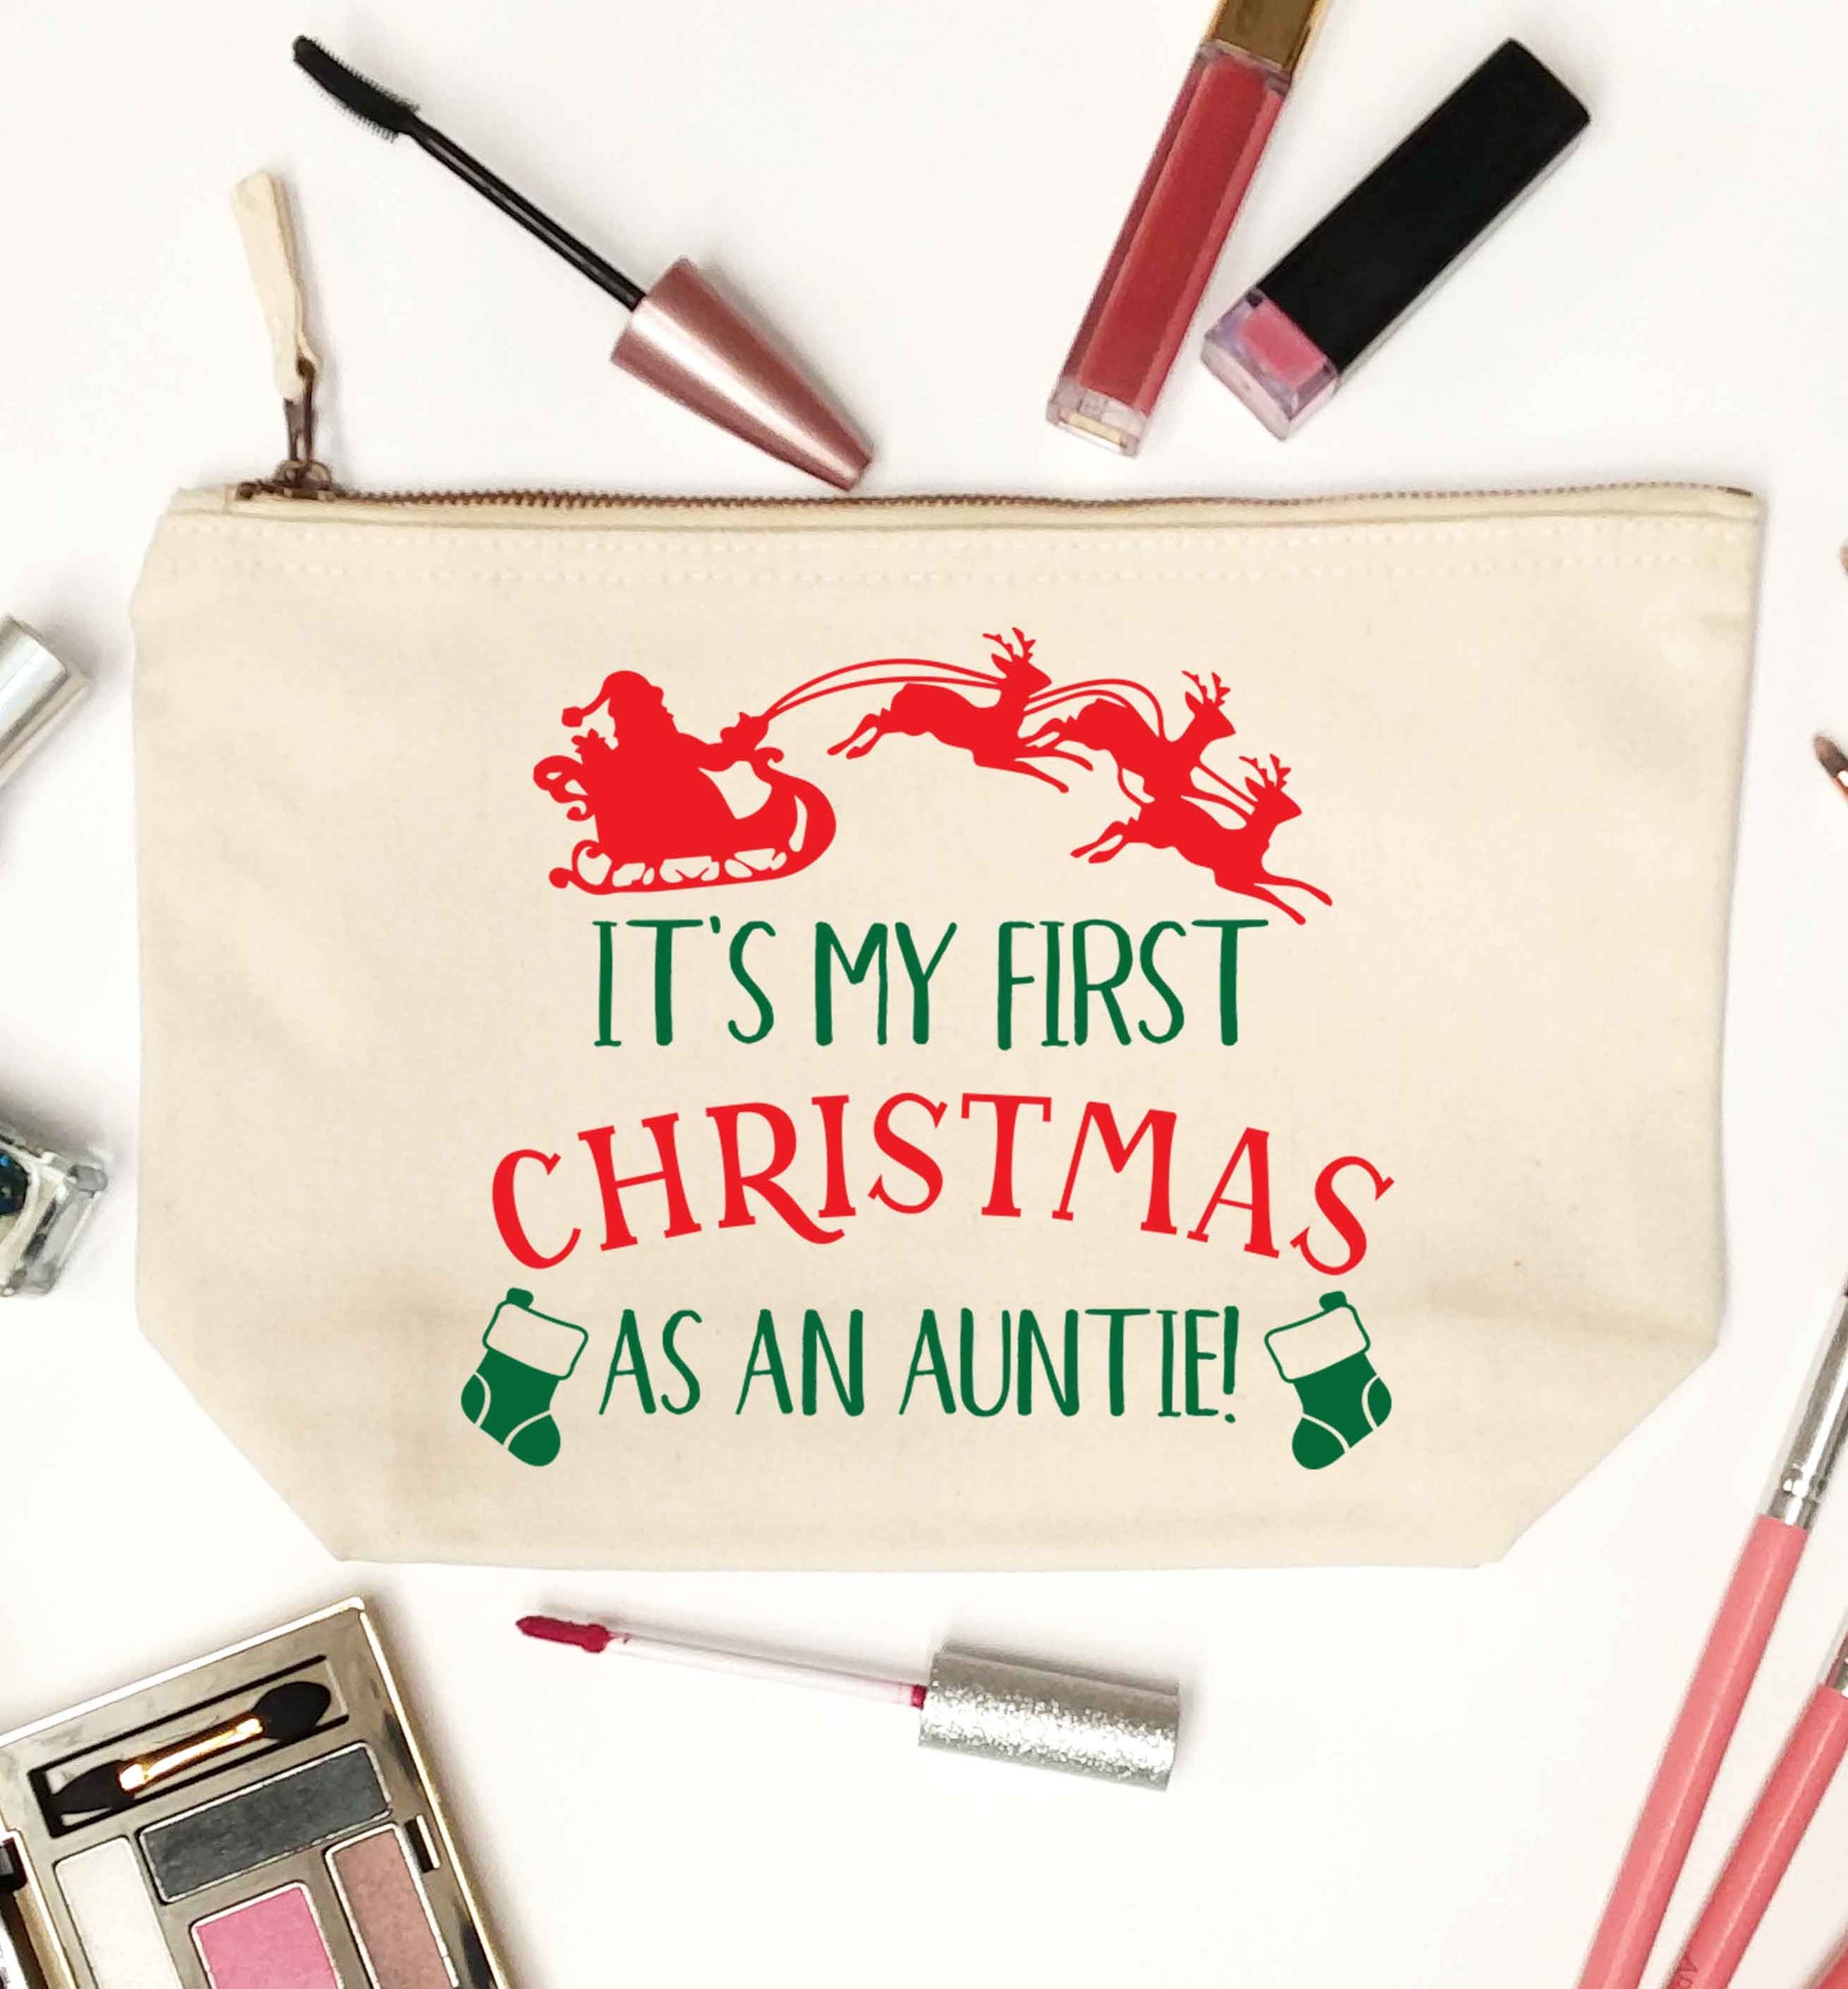 It's my first Christmas as an auntie! natural makeup bag